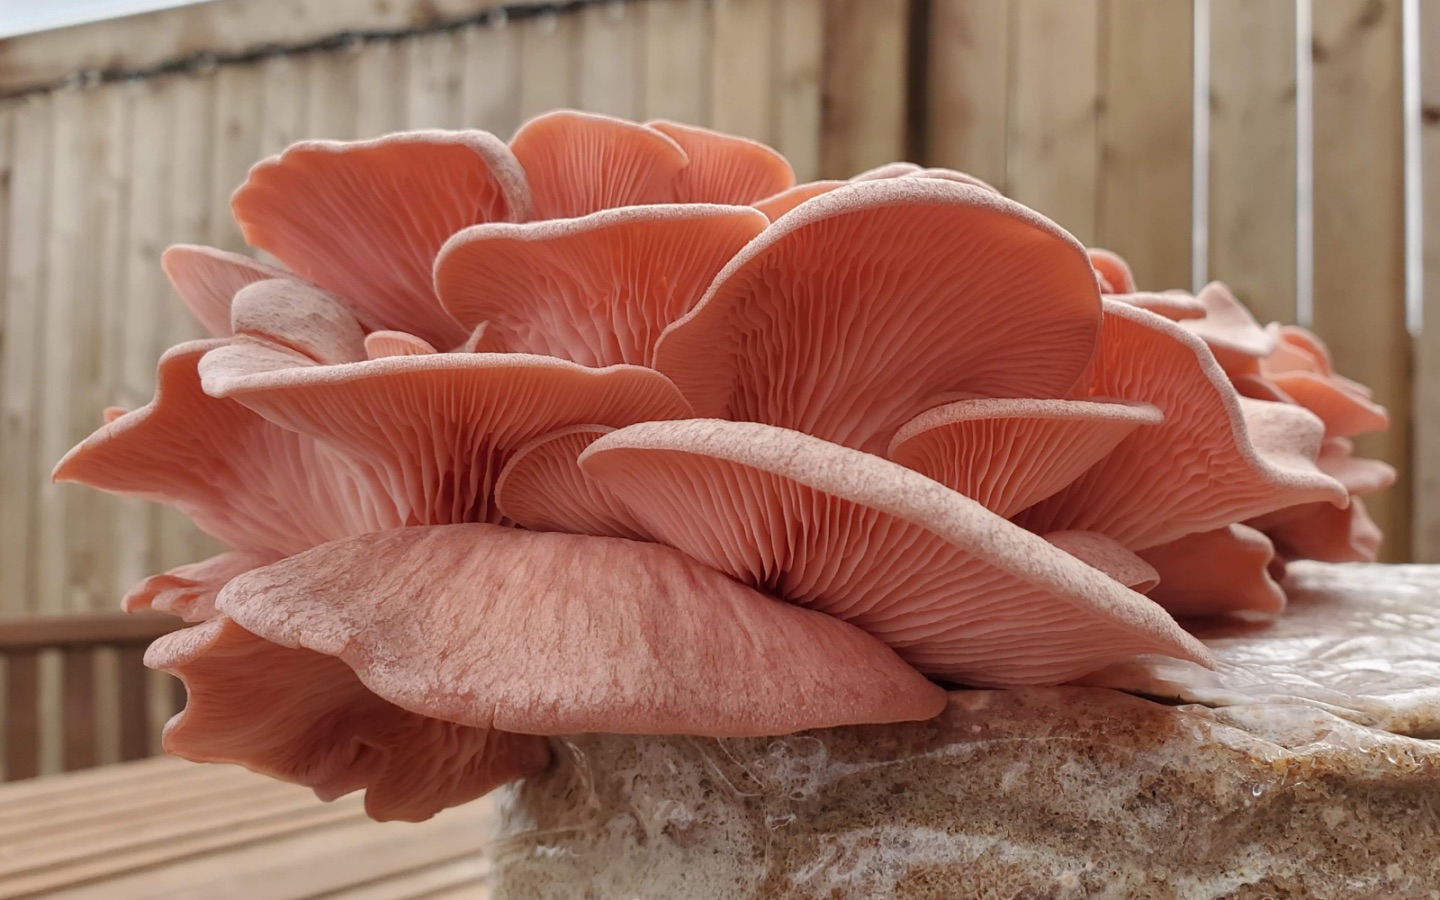 How To Store Pink Oyster Mushrooms